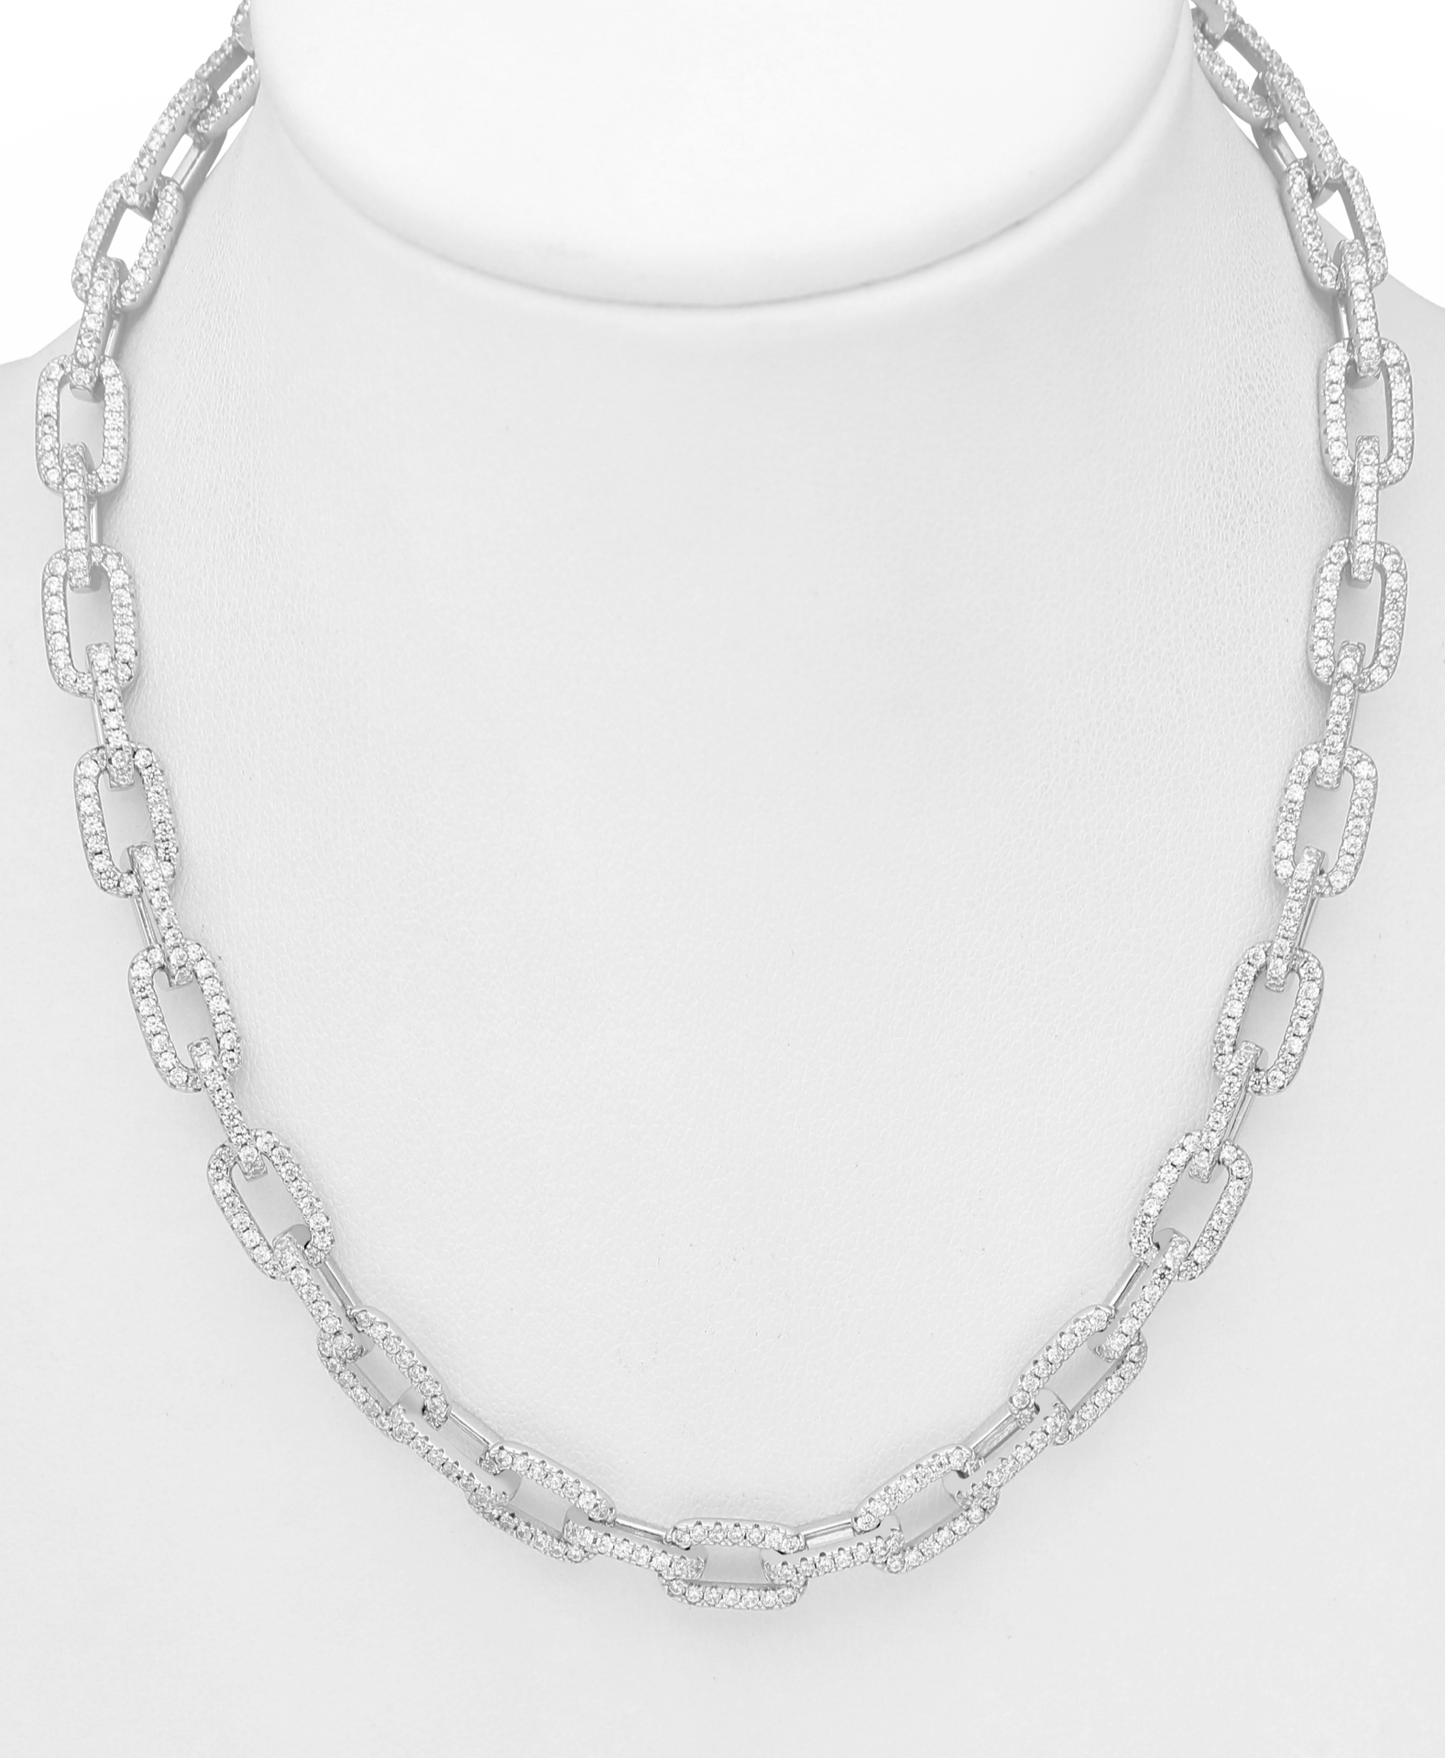 Heavy Duty Sterling Silver Links Necklace with CZ Simulated Diamonds